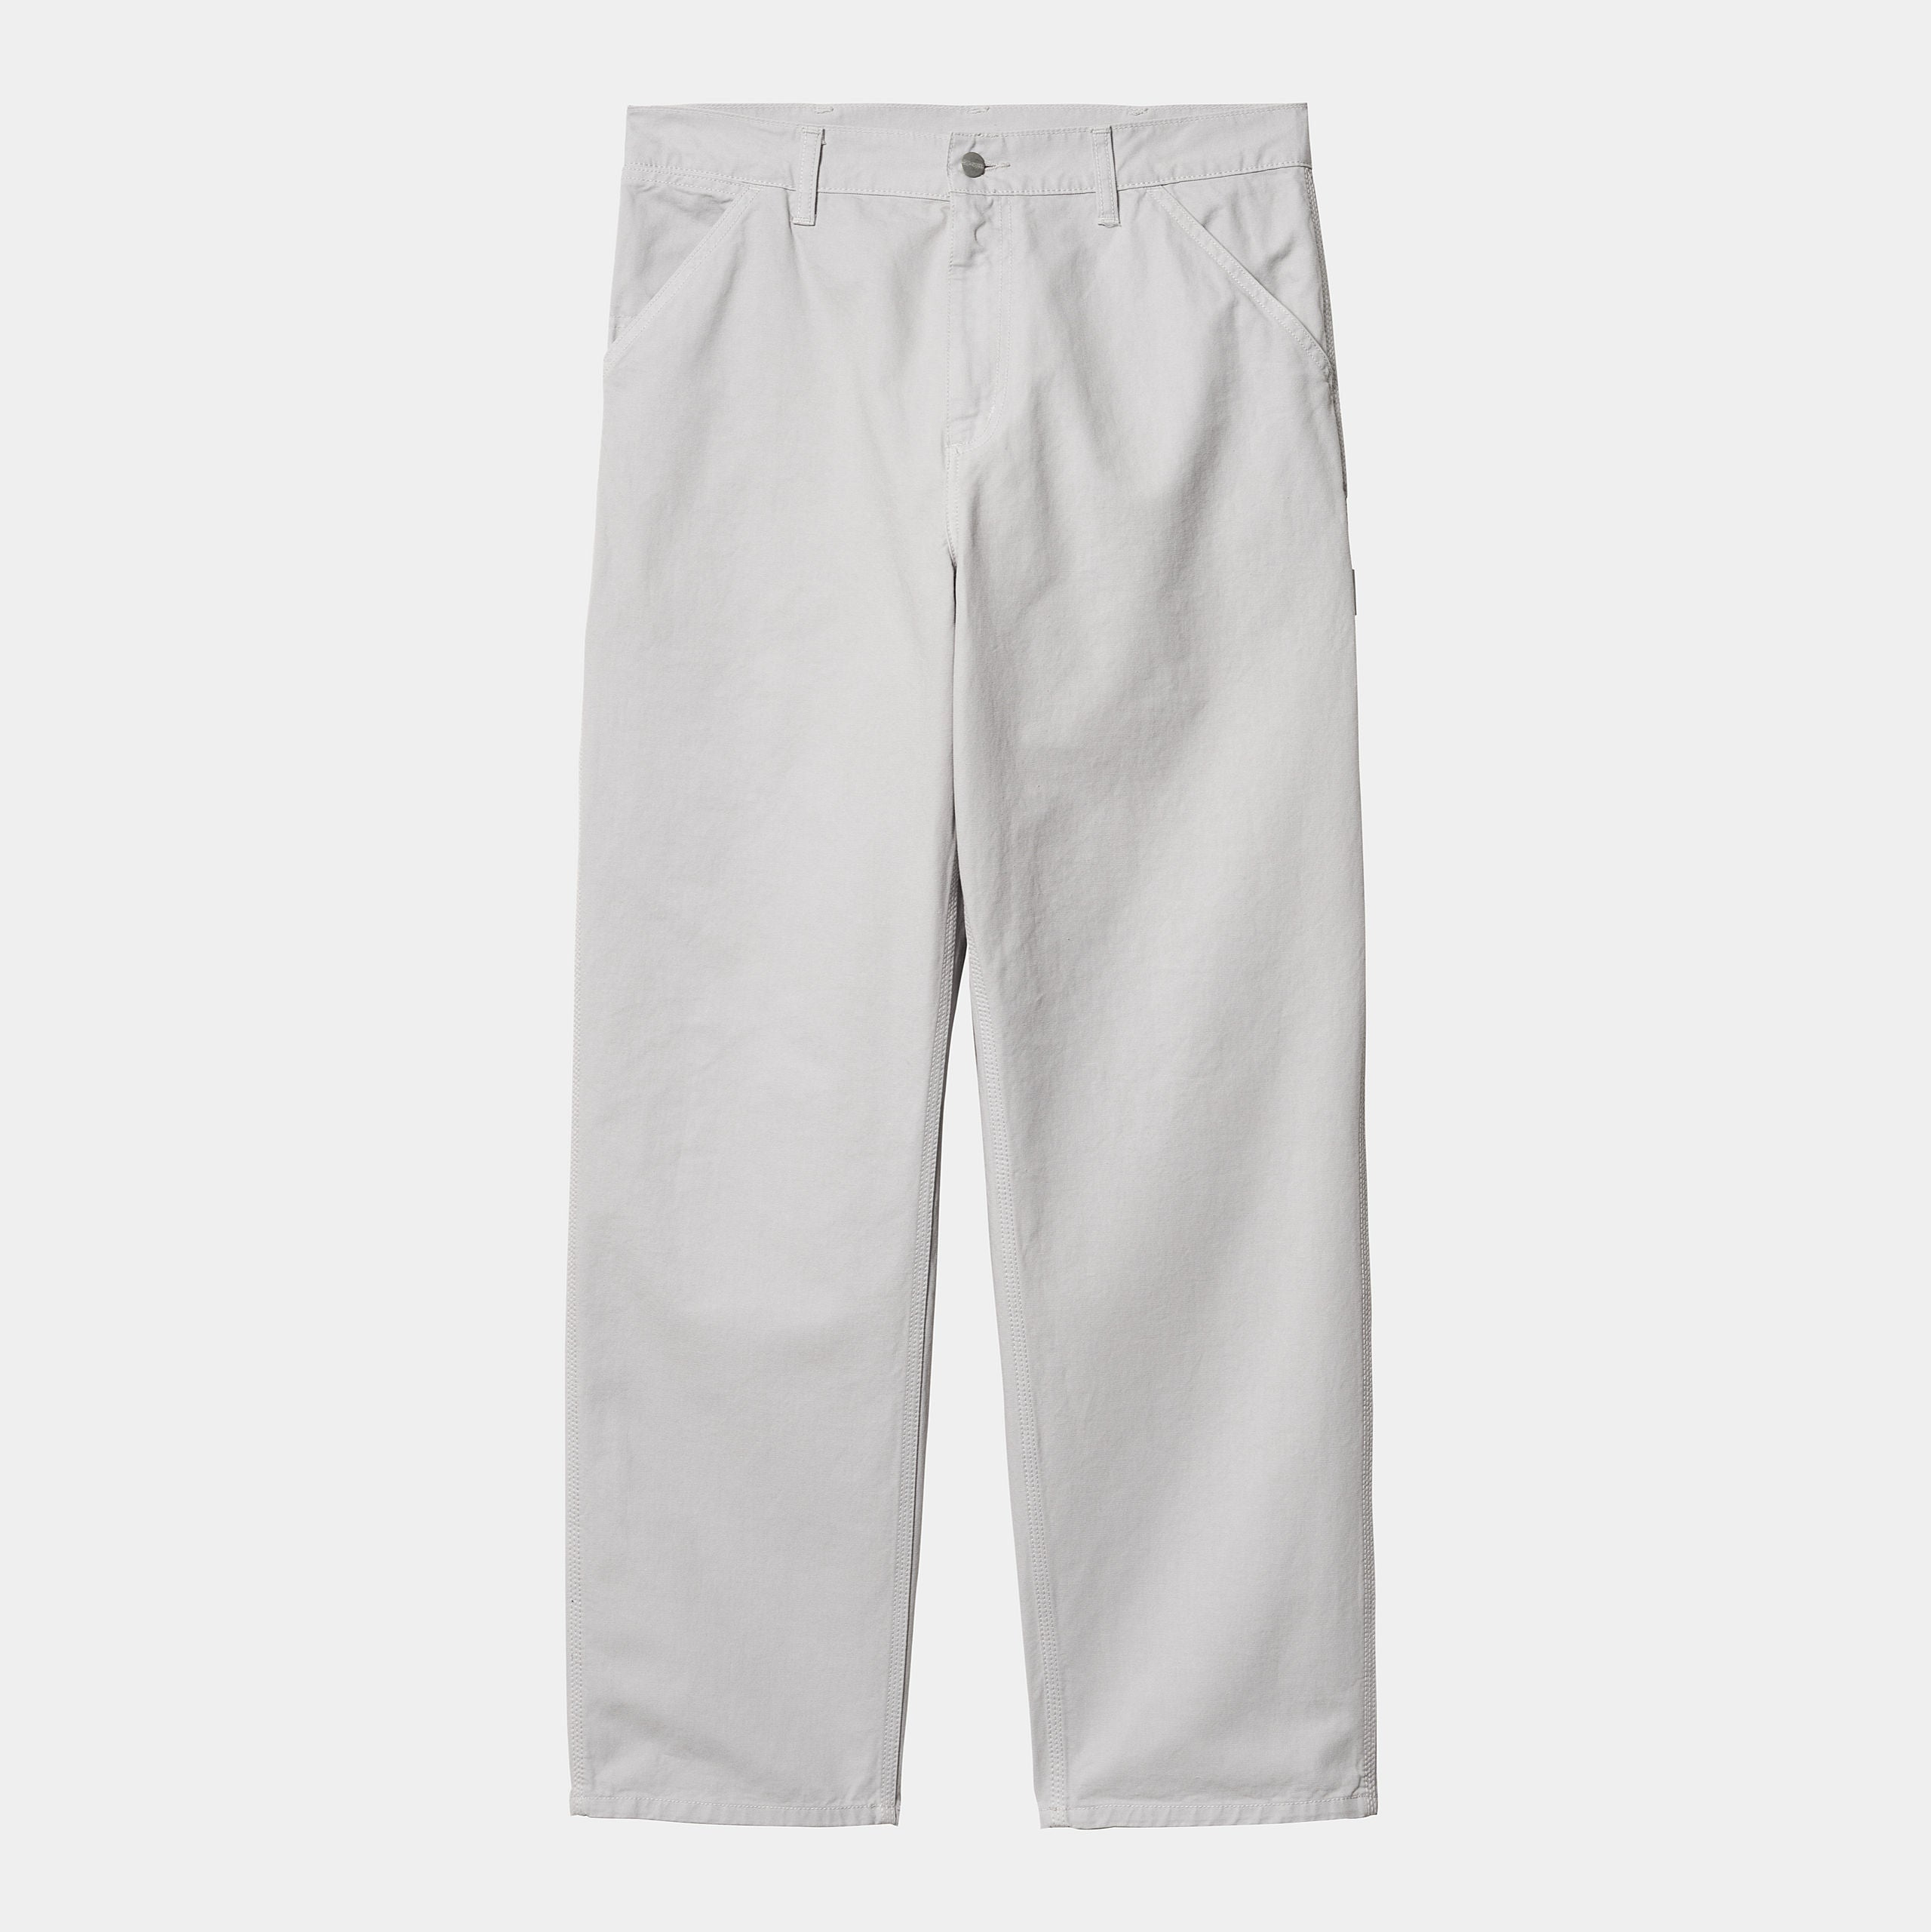 Carhartt Wip Single Knee Pant Cotton Pant Newcomb Drill Uomo